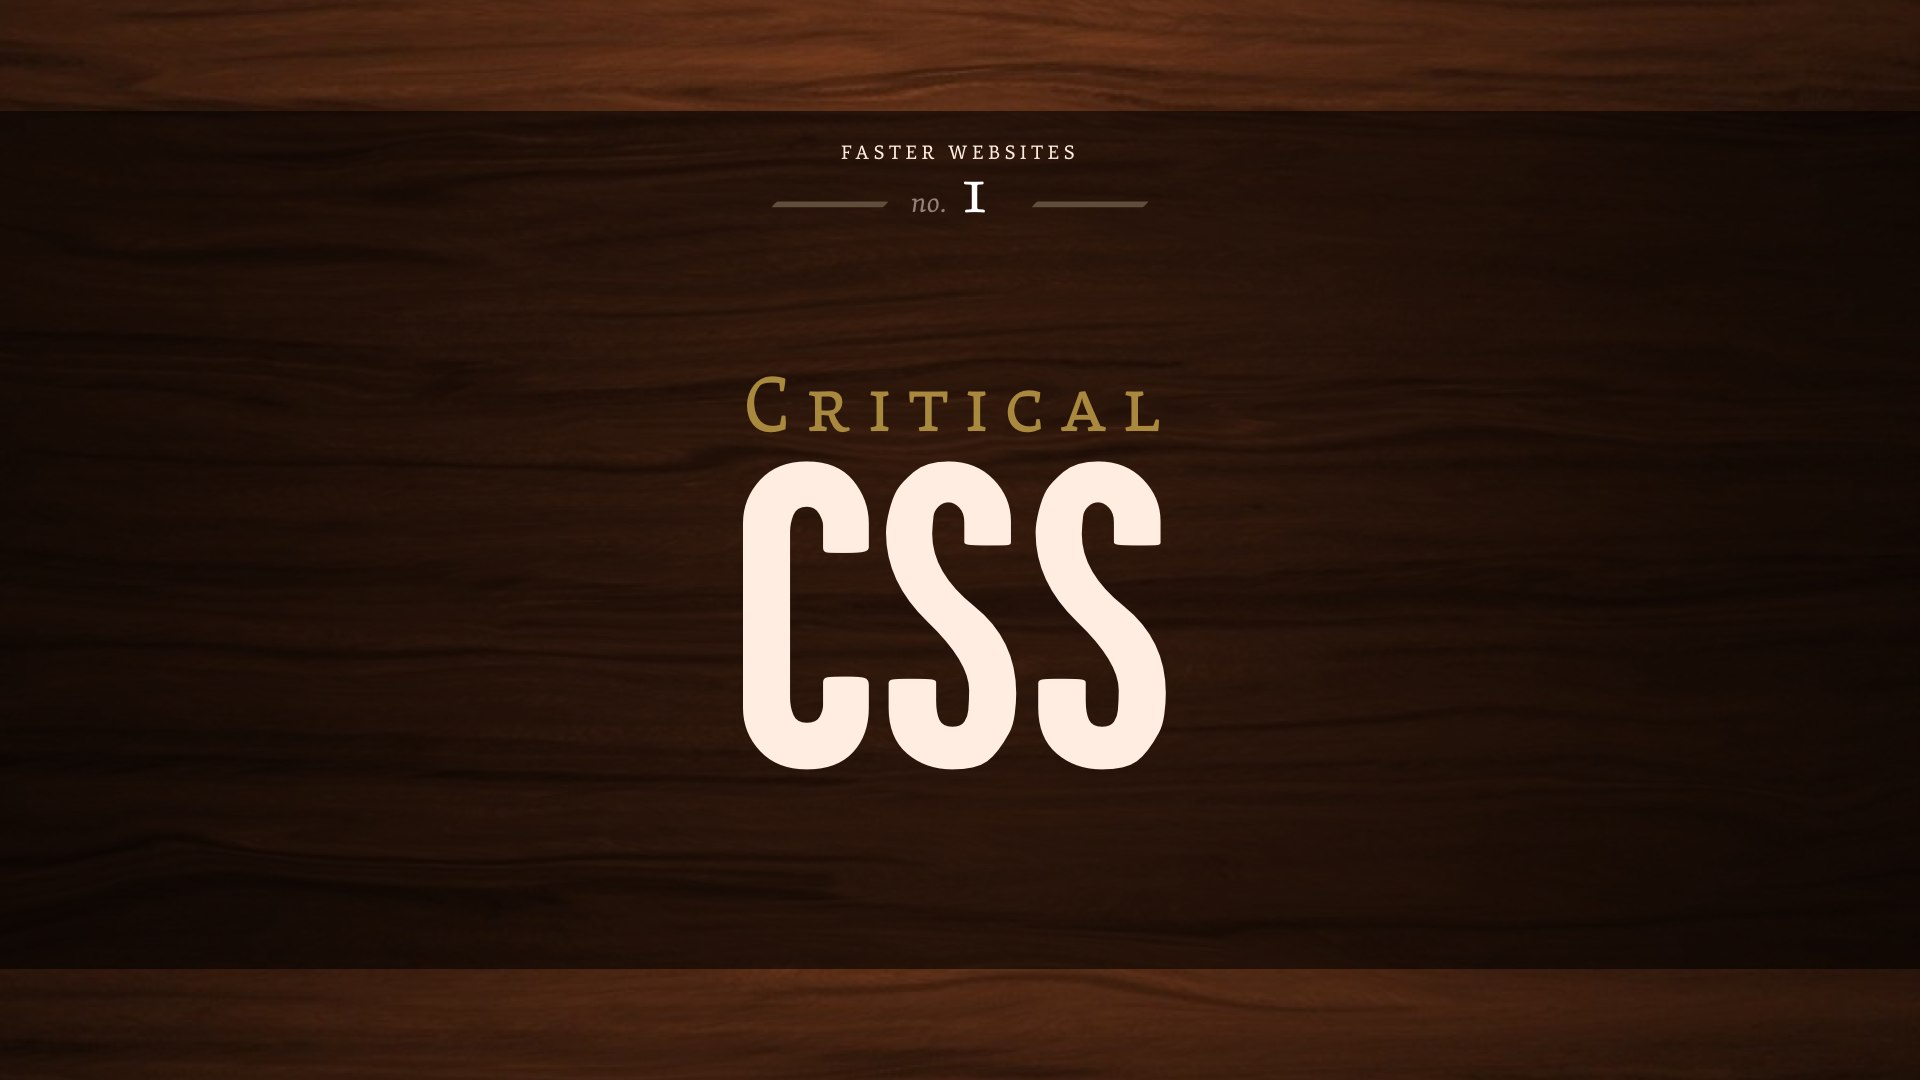 Faster Websites: CriticalCSS